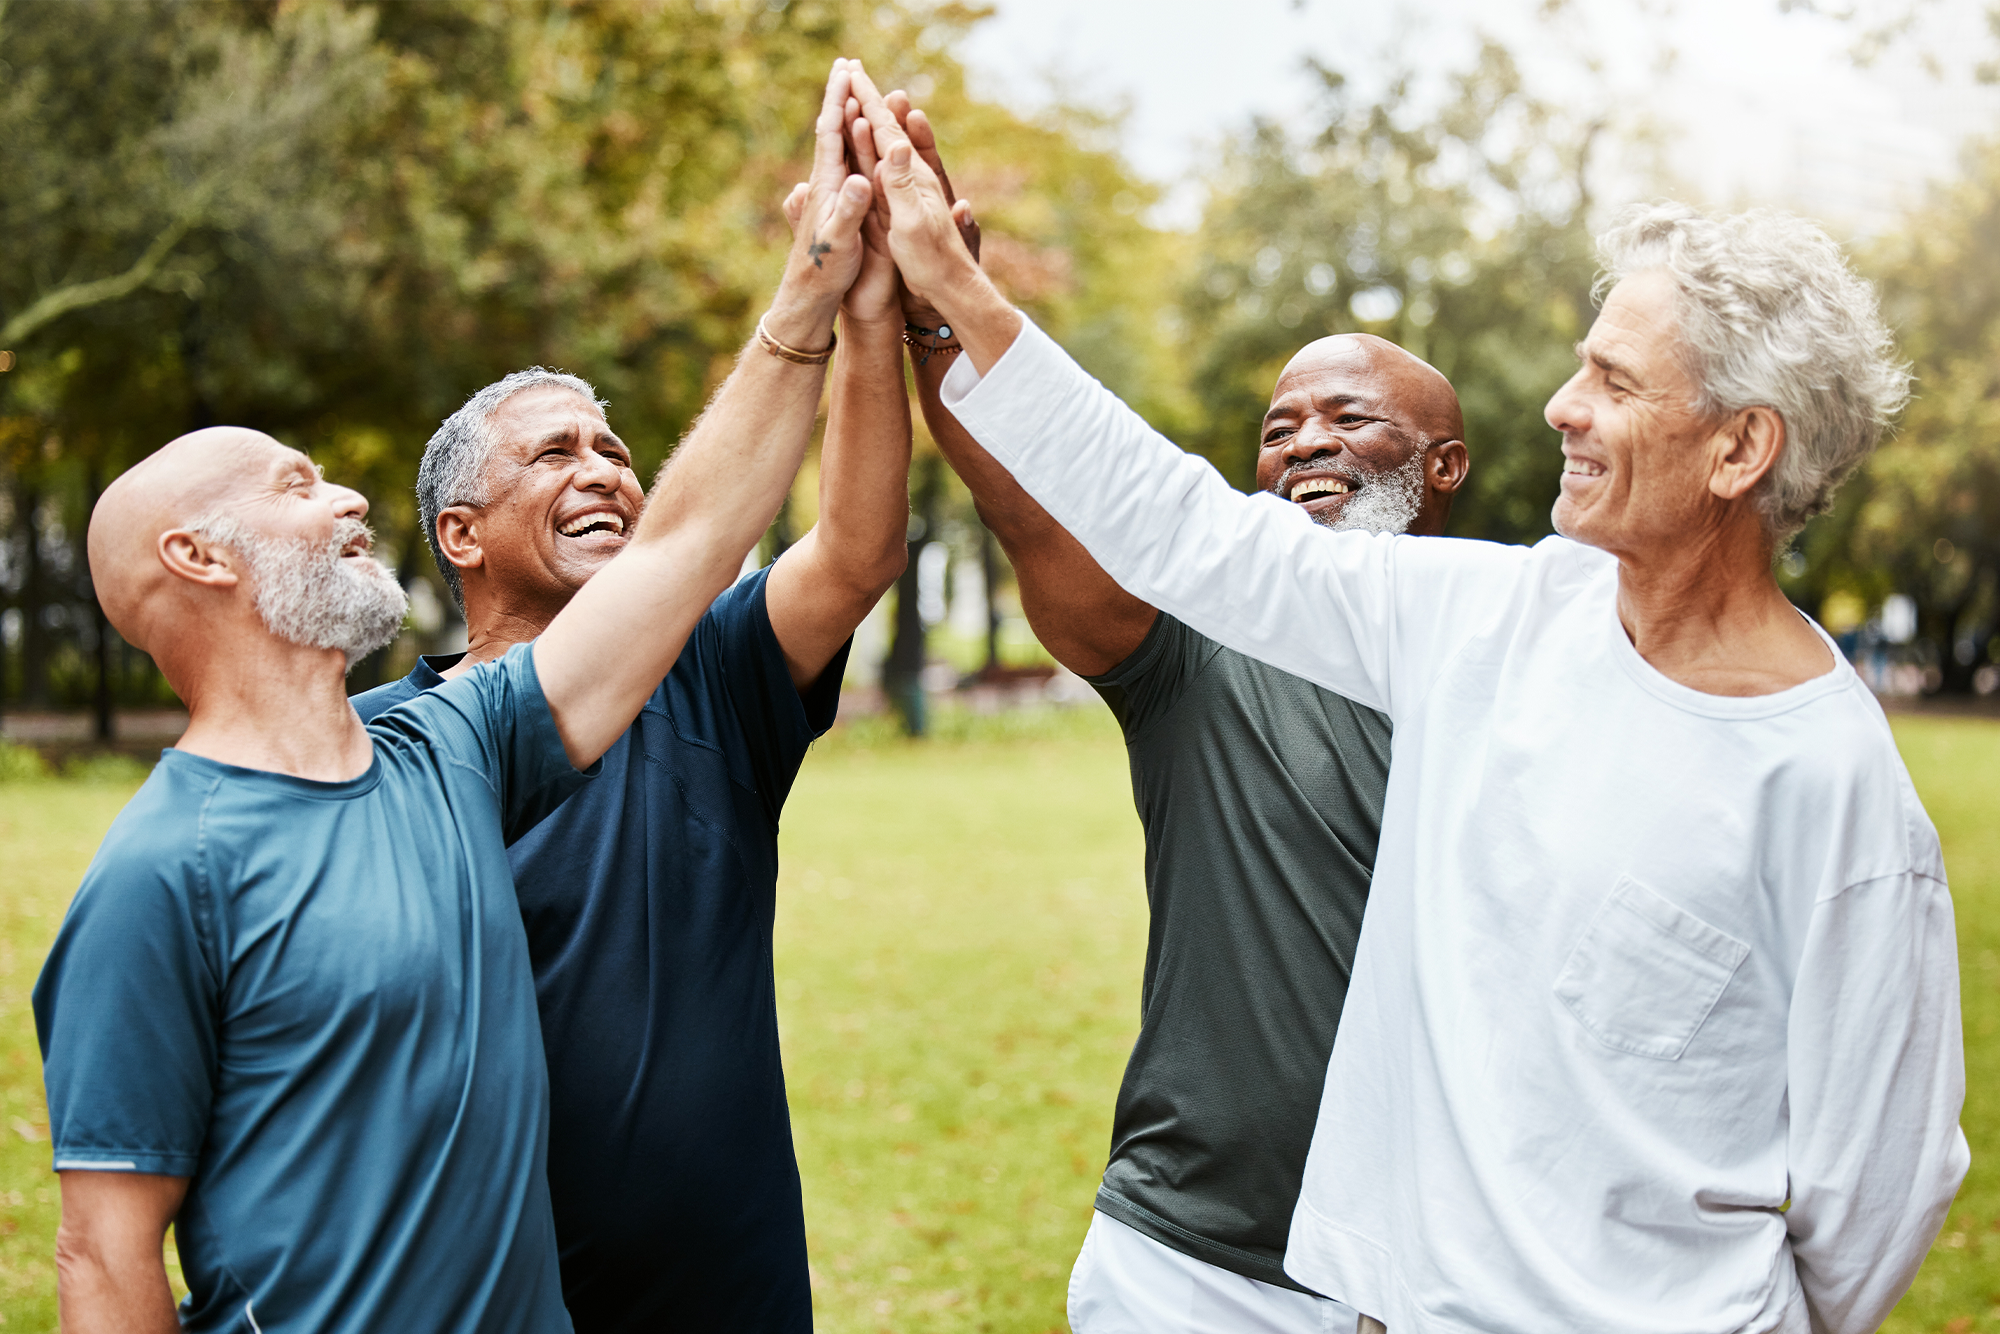 How Targeted Wellness Programs Can Reduce Workers' Compensation Claims: A group of men high-fiving in the park.